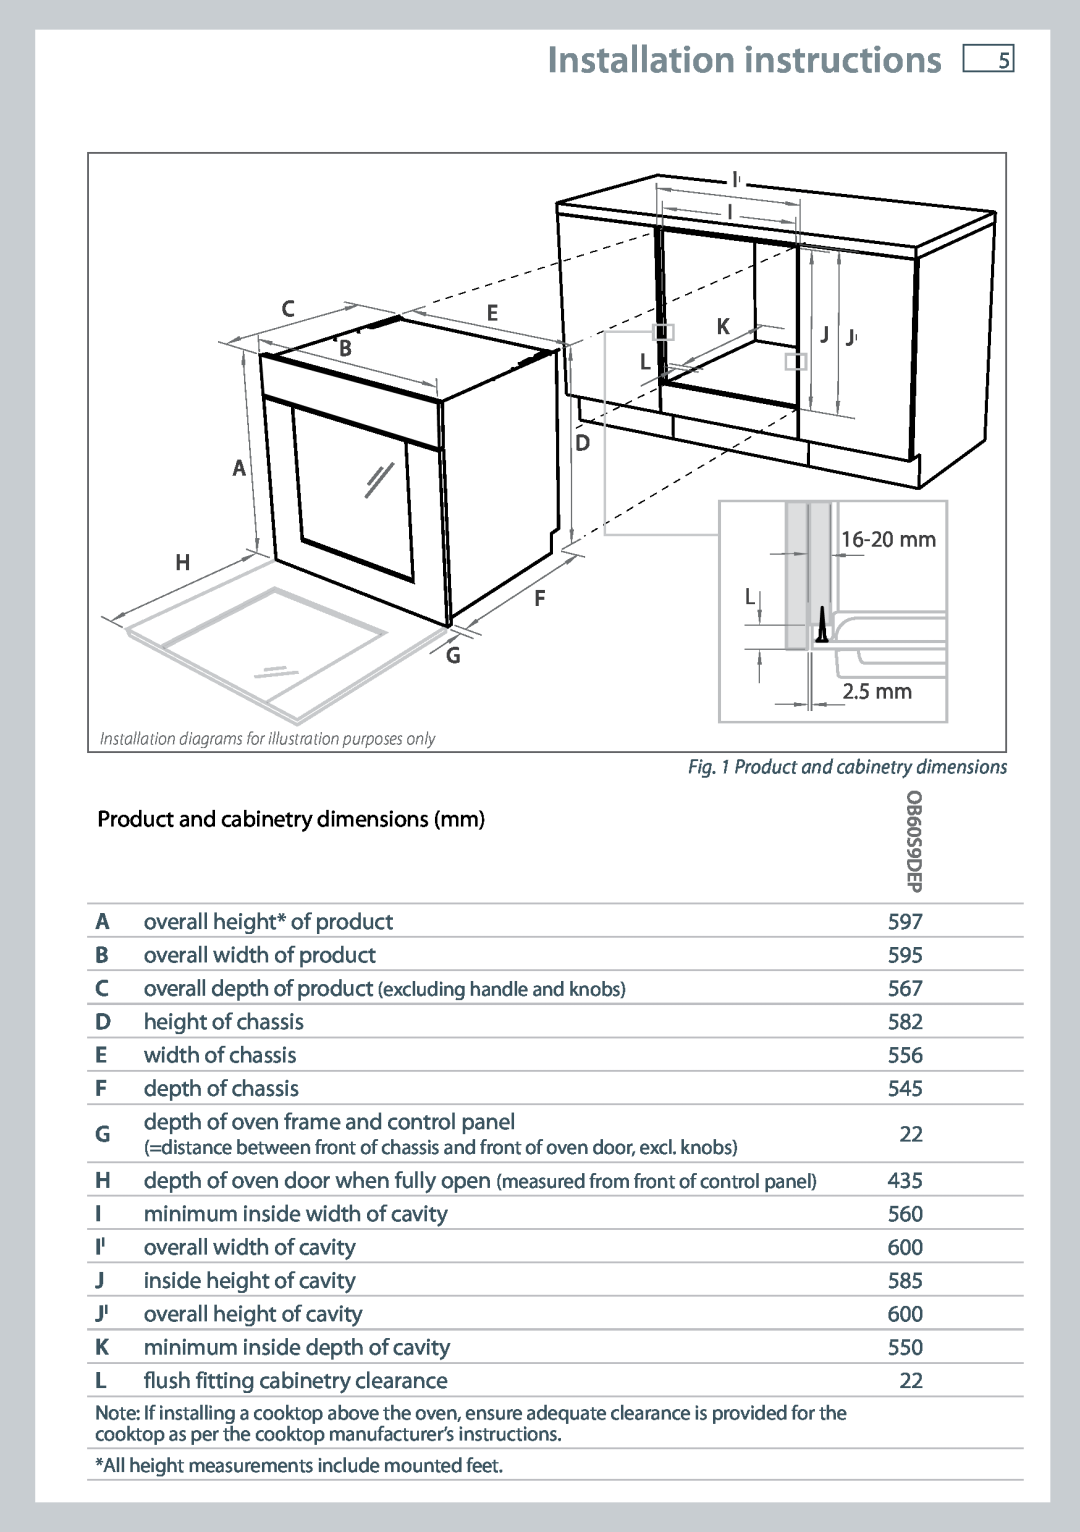 Fisher & Paykel OB60S9DEP installation instructions Installation instructions, J Ji, H Fl G, 16-20mm 2.5 mm 